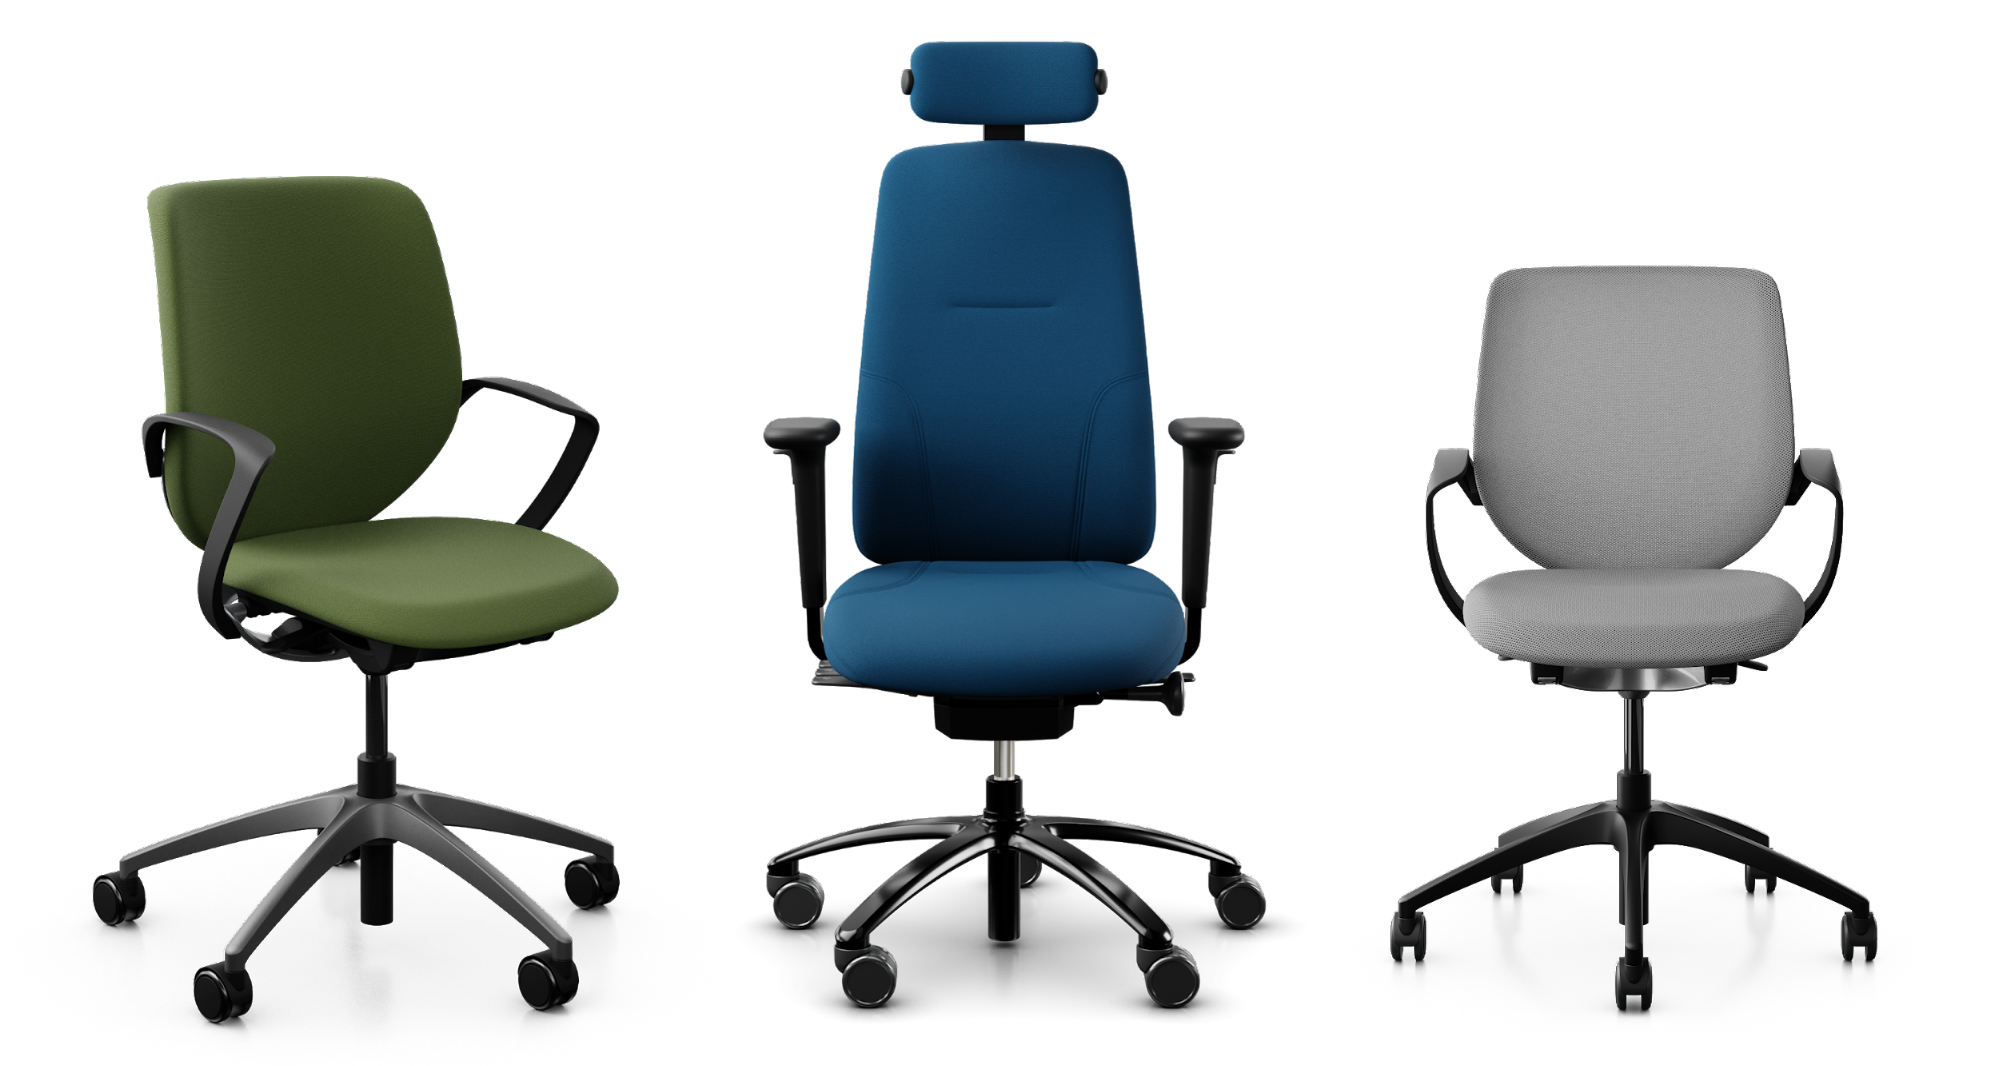 Image showing a green office chair, blue office chair, and grey office chair